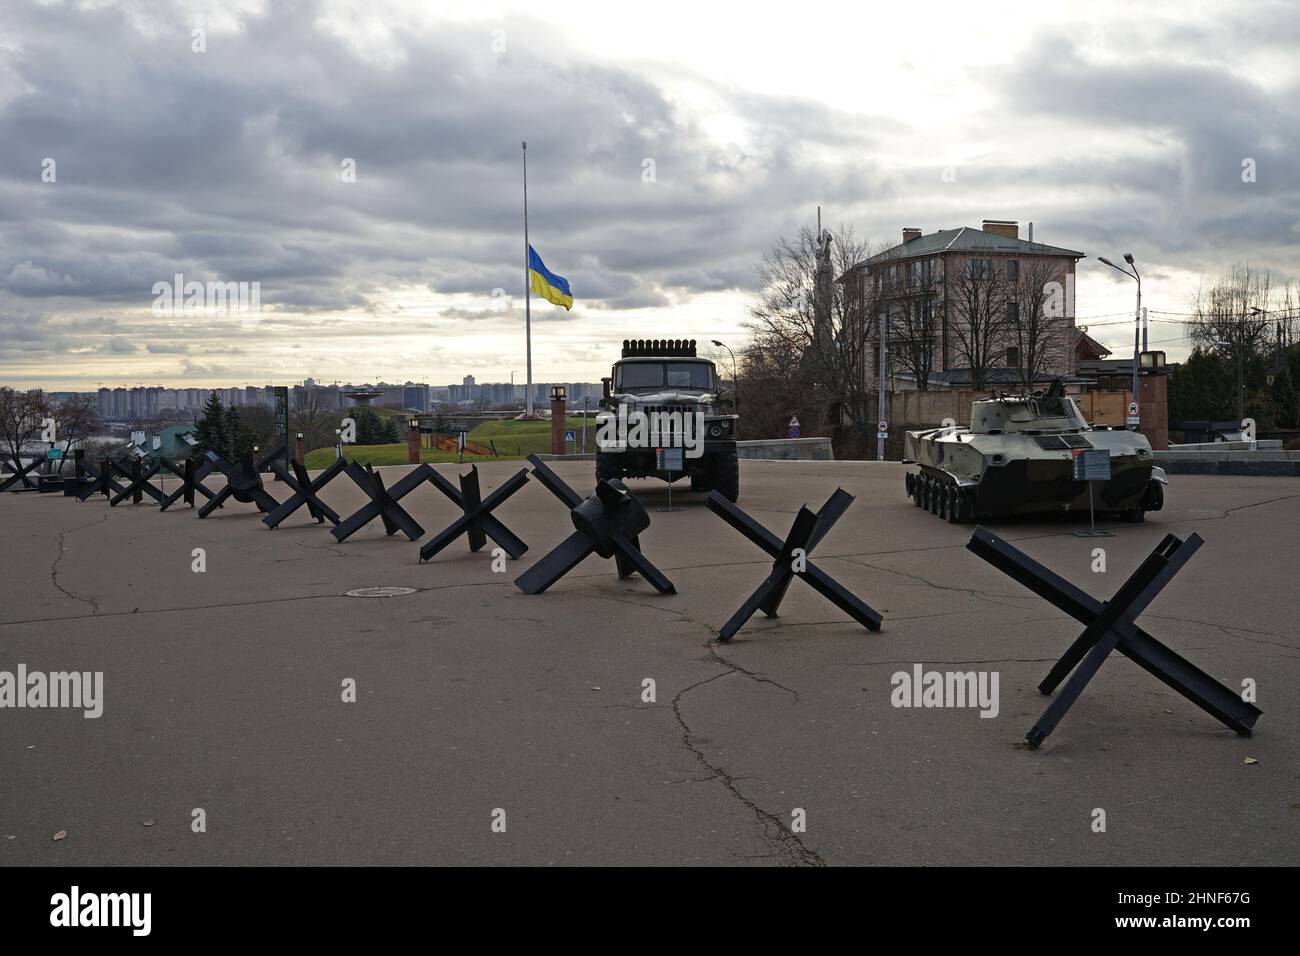 Kyiv, Ukraine - November 22 2021: Ukrainian and Russian war weapons, tanks and transporters on display in front of flag post Stock Photo